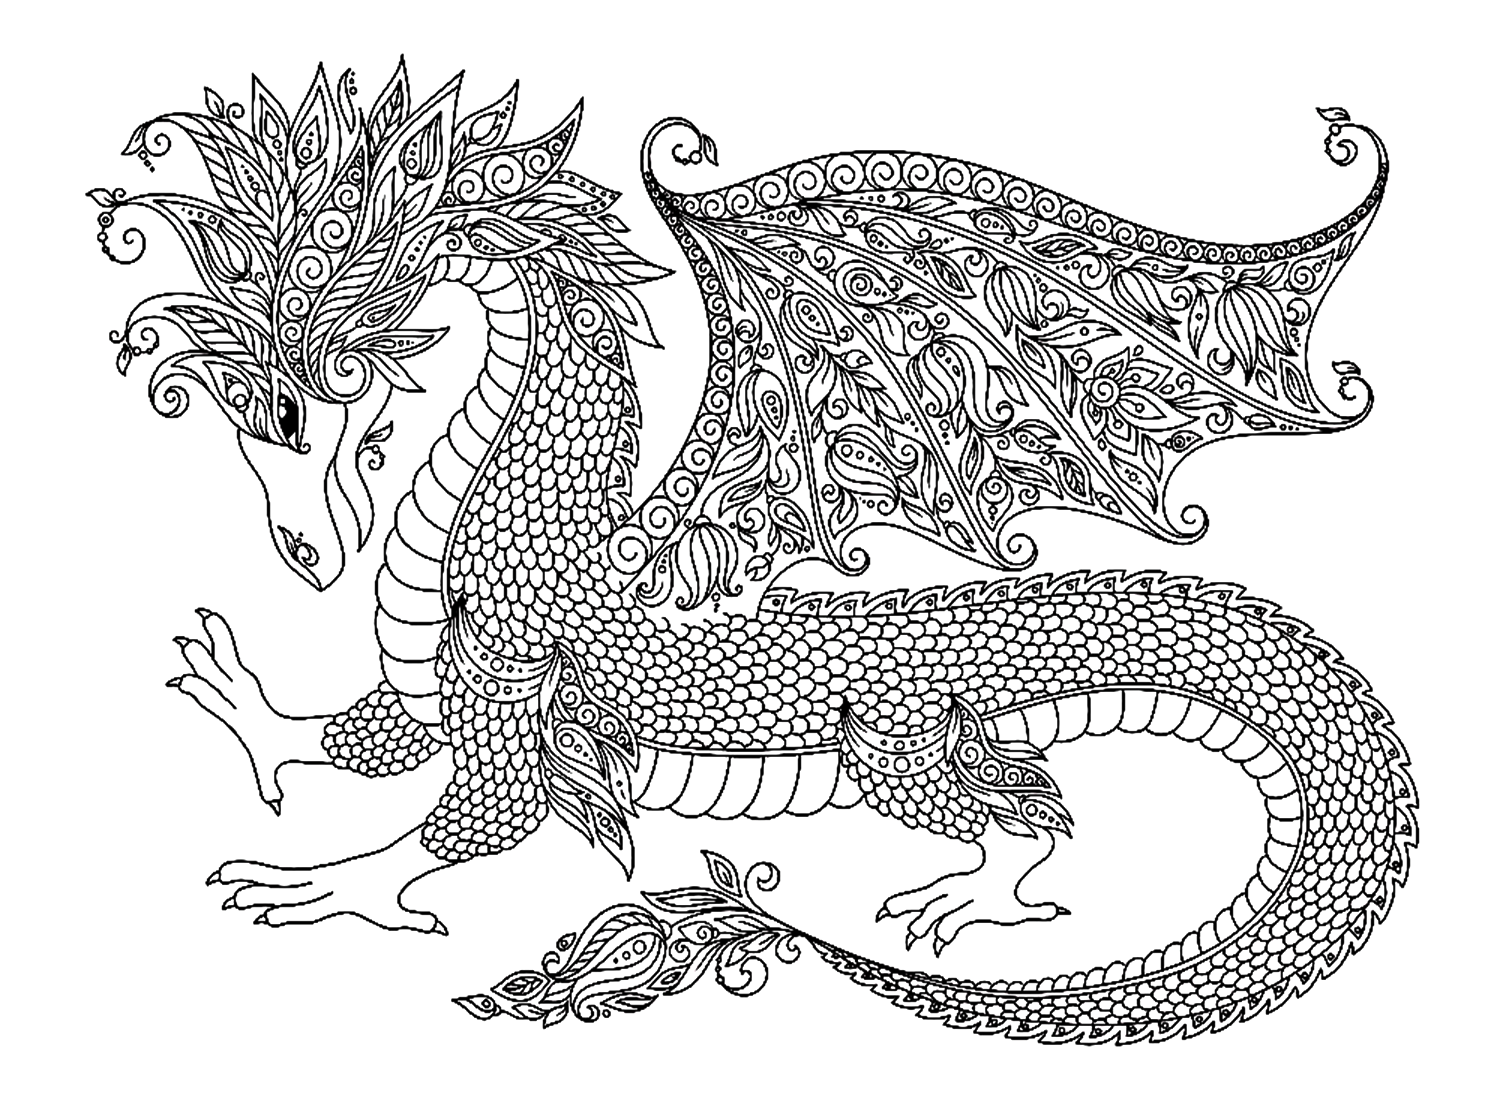 Dragon Coloring Pages For Adults from Dragon